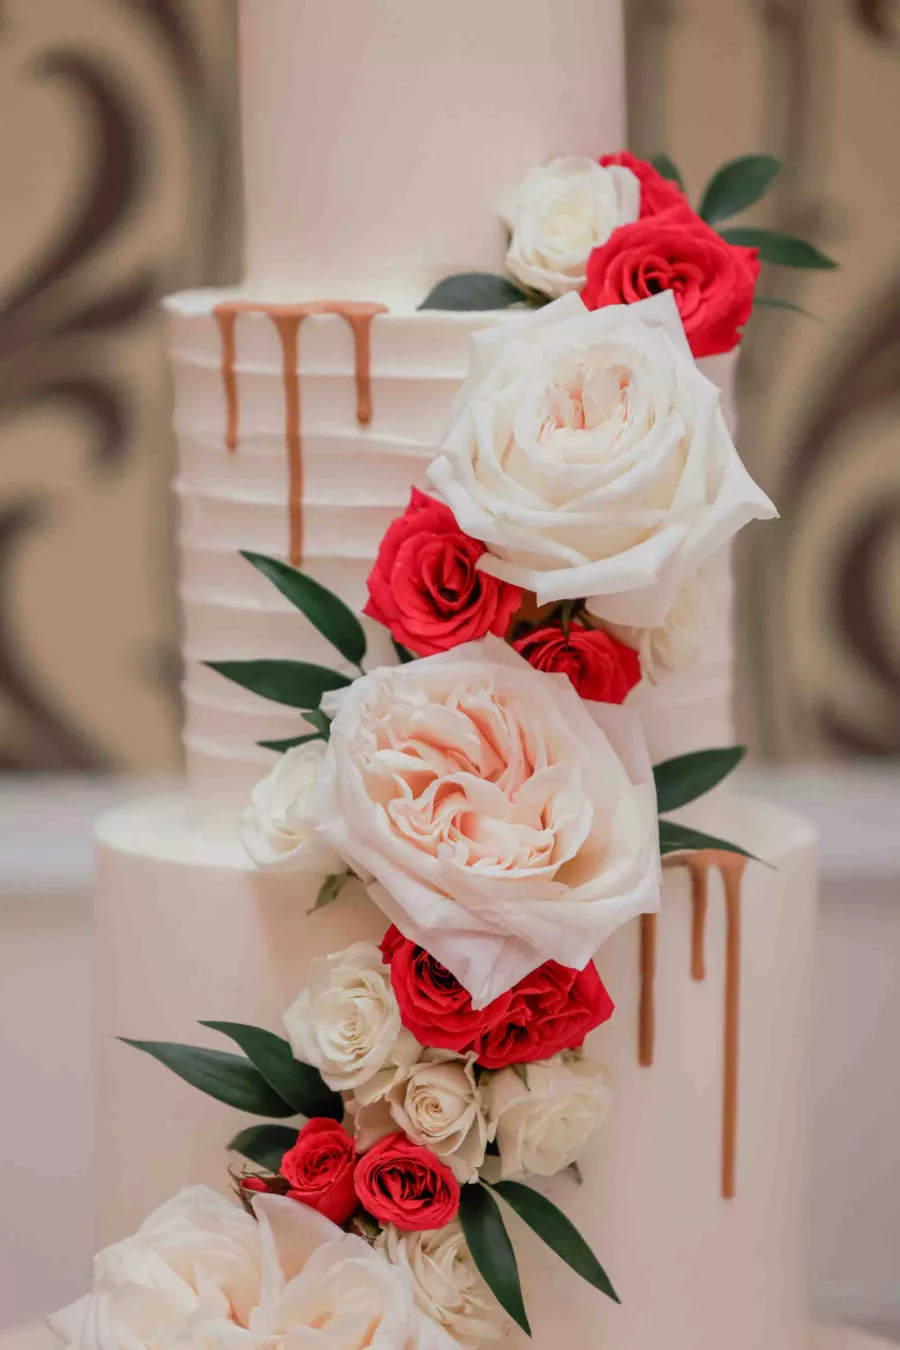 Four-Tiered White Round Textured Buttercream Wedding Cake with Gold Drip, Pink Garden Roses, and White Baby Spray Rose Accent Ideas